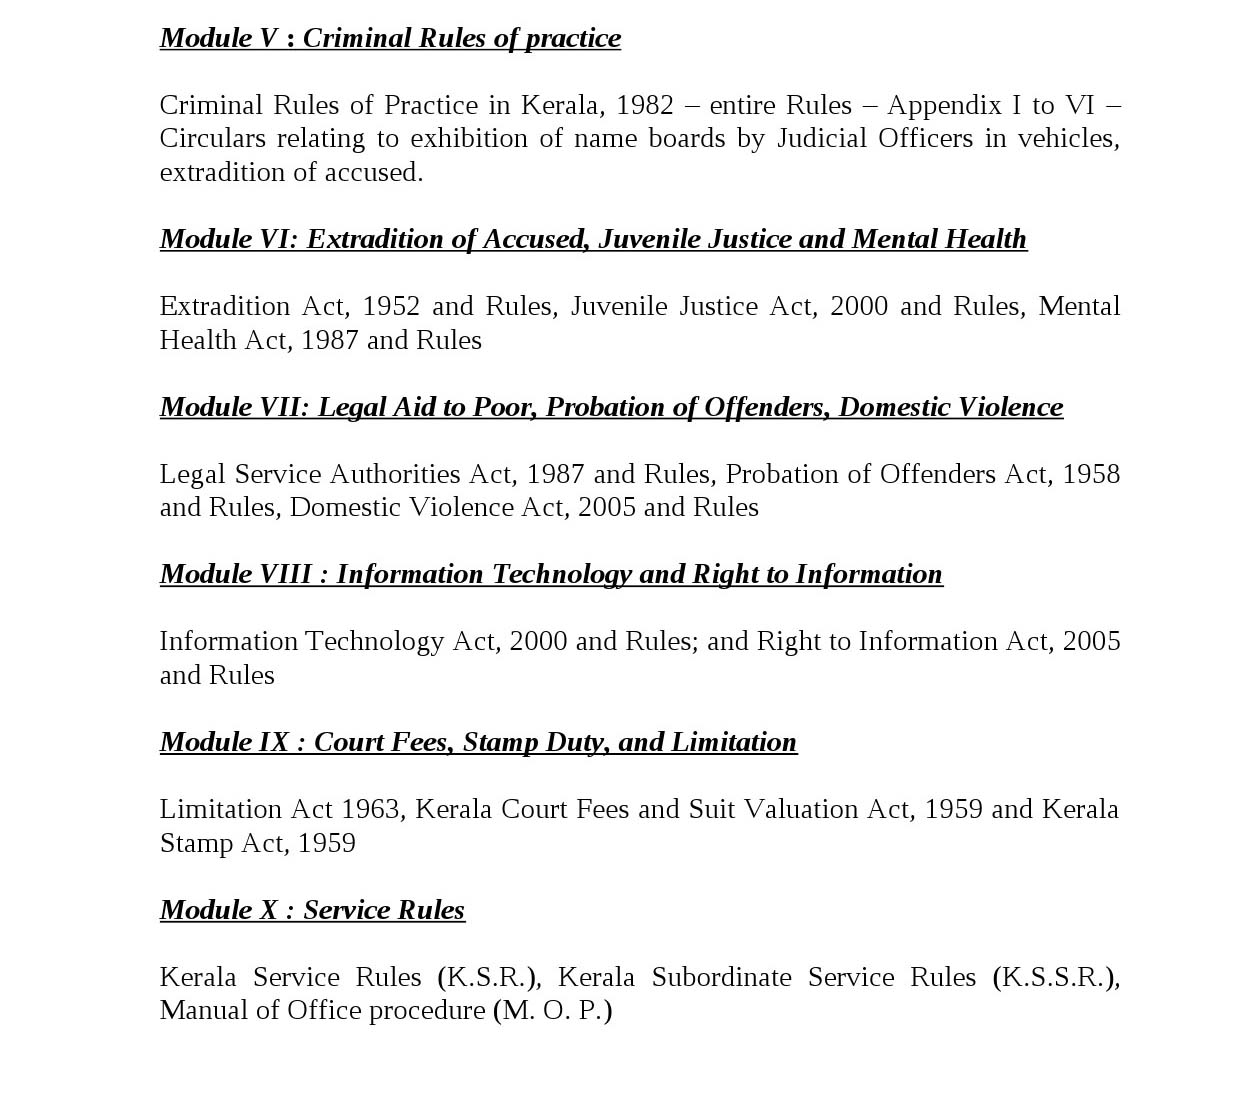 Syllabus for Exams with LLB as Qualification - Notification Image 17